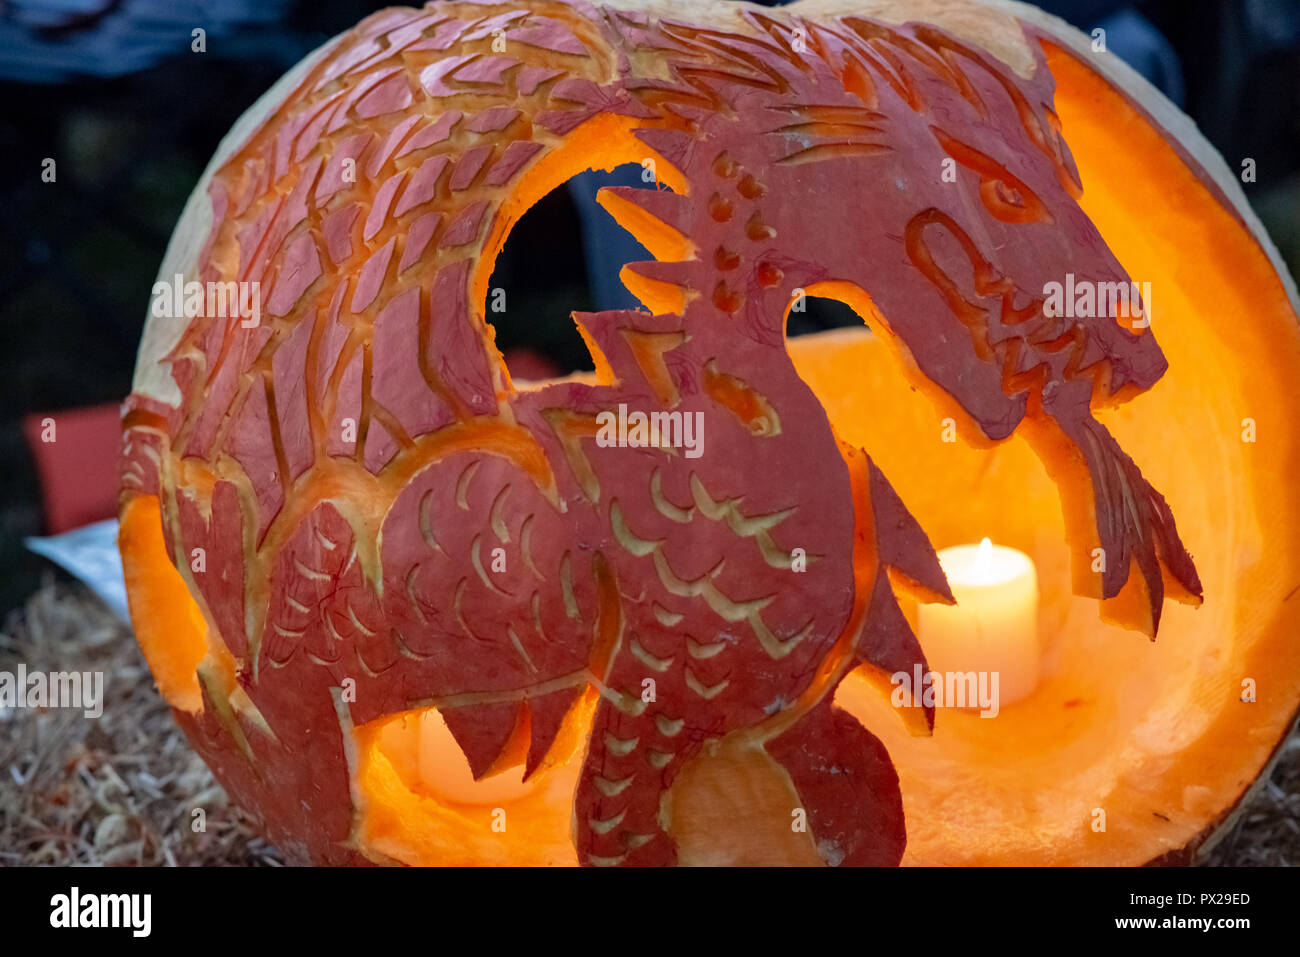 CHADDS FORD, PA - OCTOBER 18: Dragon at The Great Pumpkin Carve carving contest on October 18, 2018 Stock Photo